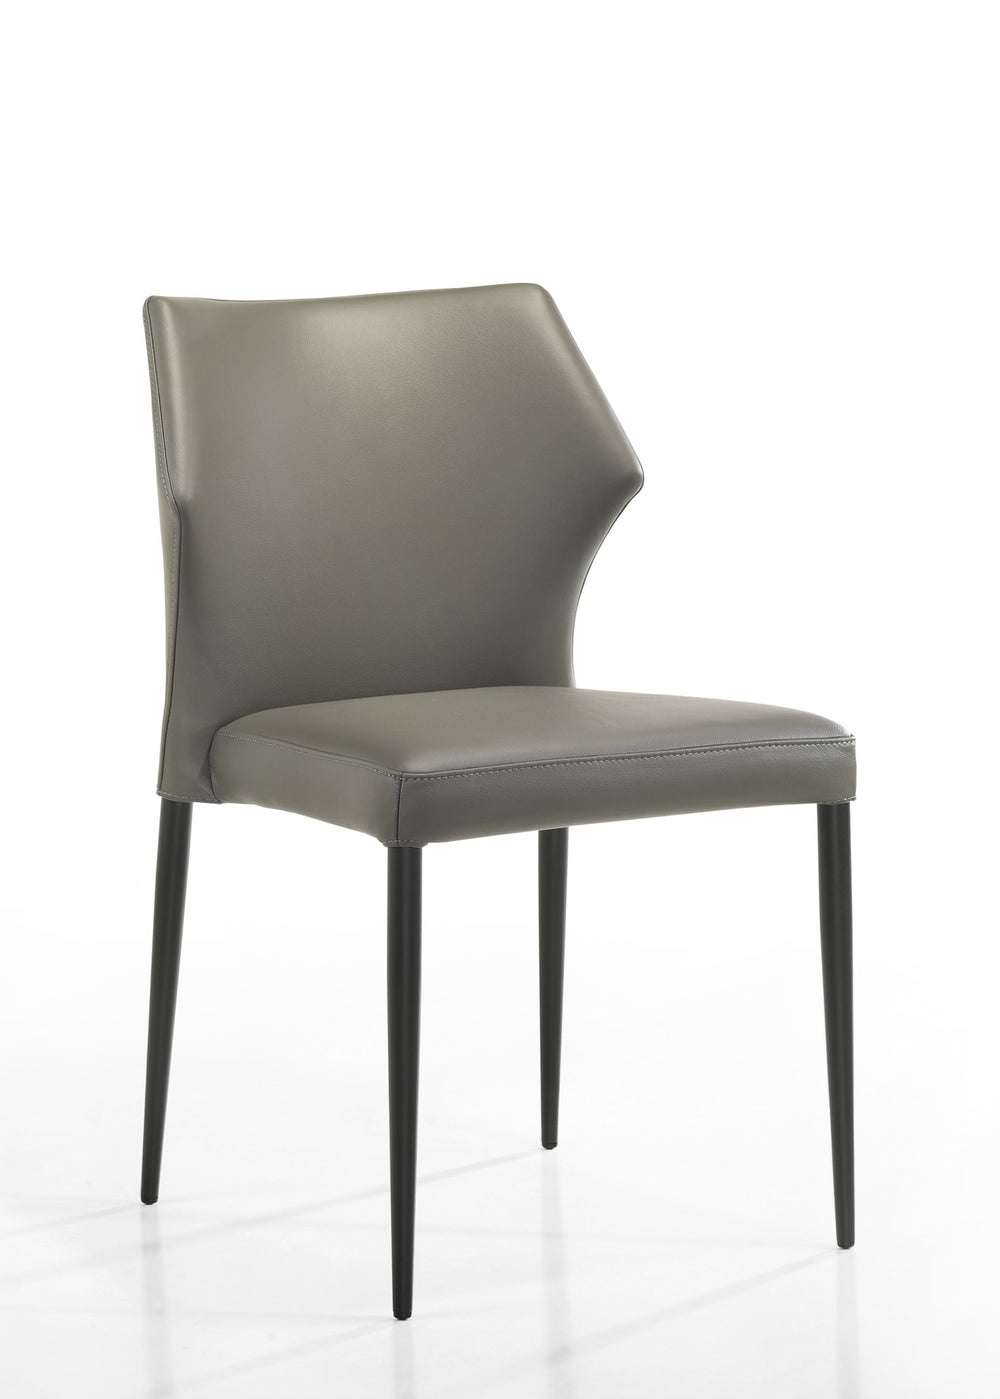 Luke Soft Leather chair sold in set of two - Atmosphere Interiors